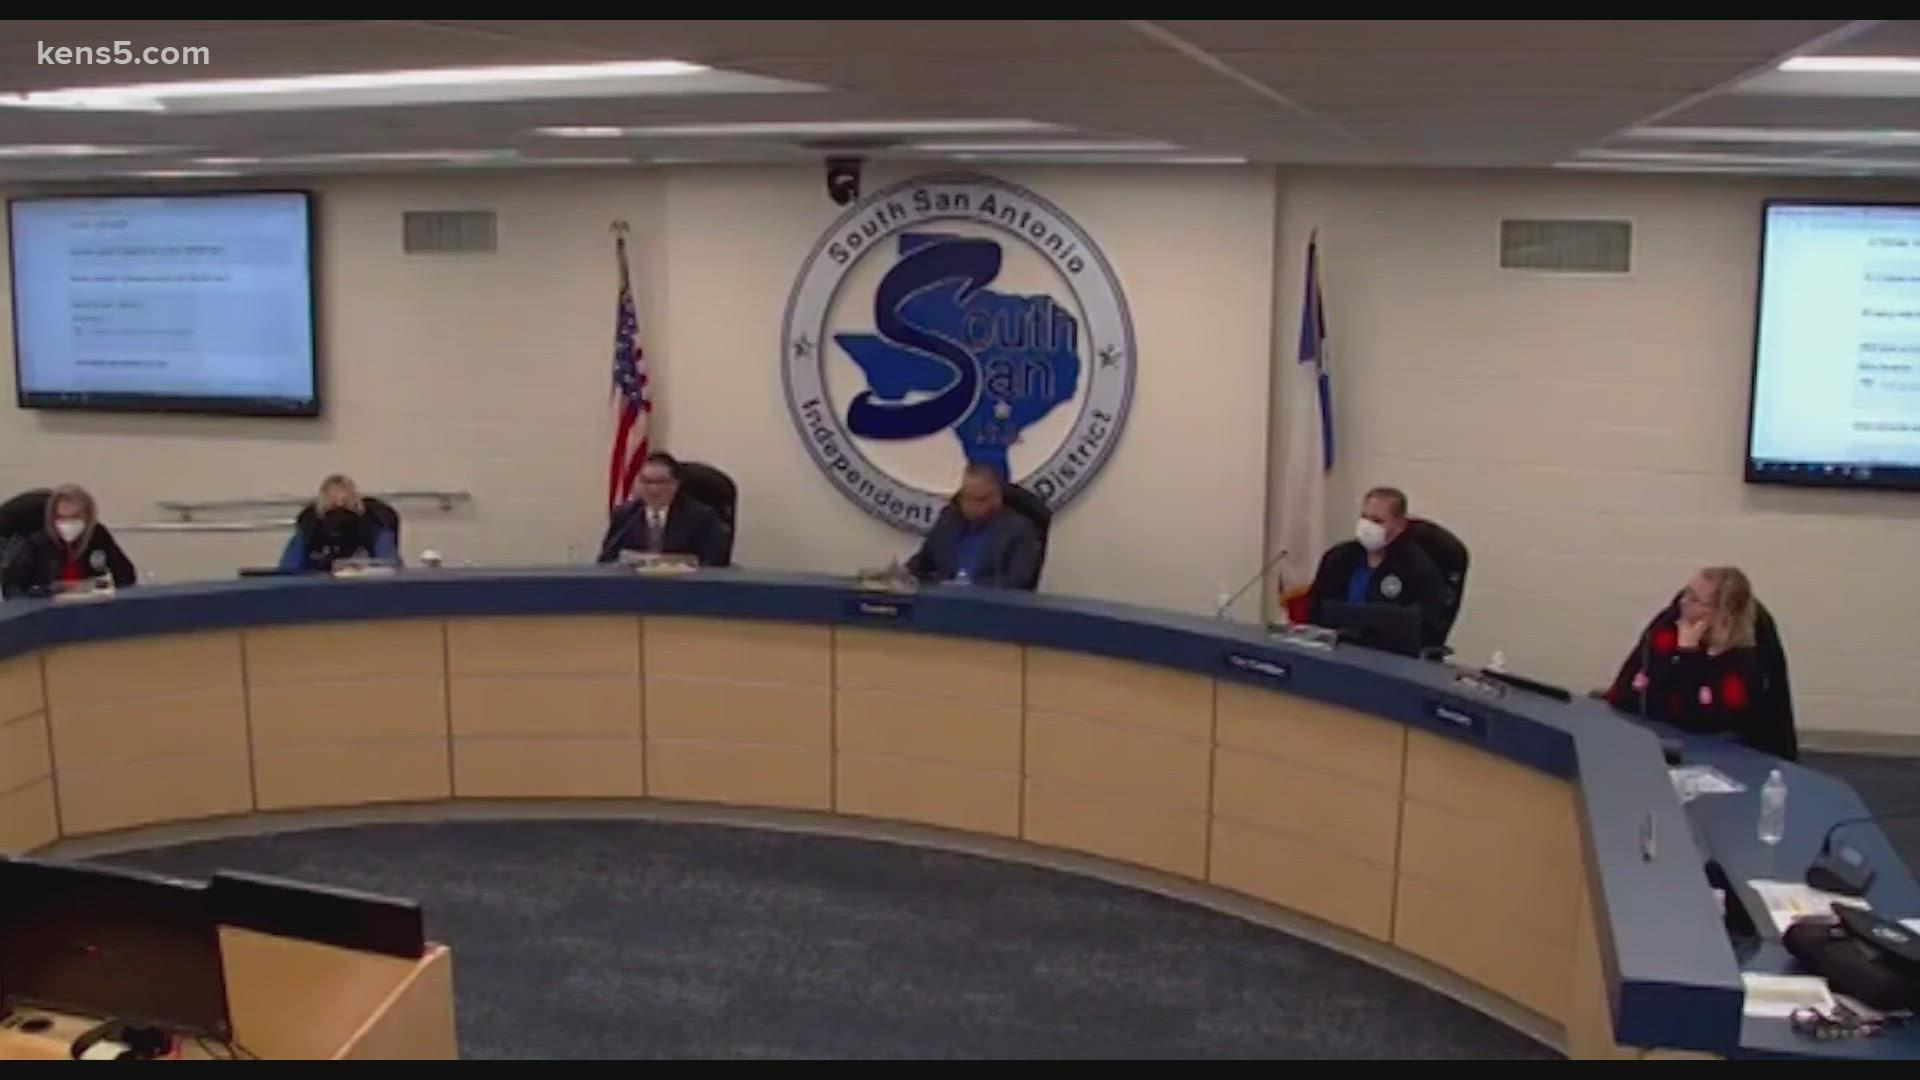 The announcement was made Thursday afternoon by the South San ISD Board of Trustees.